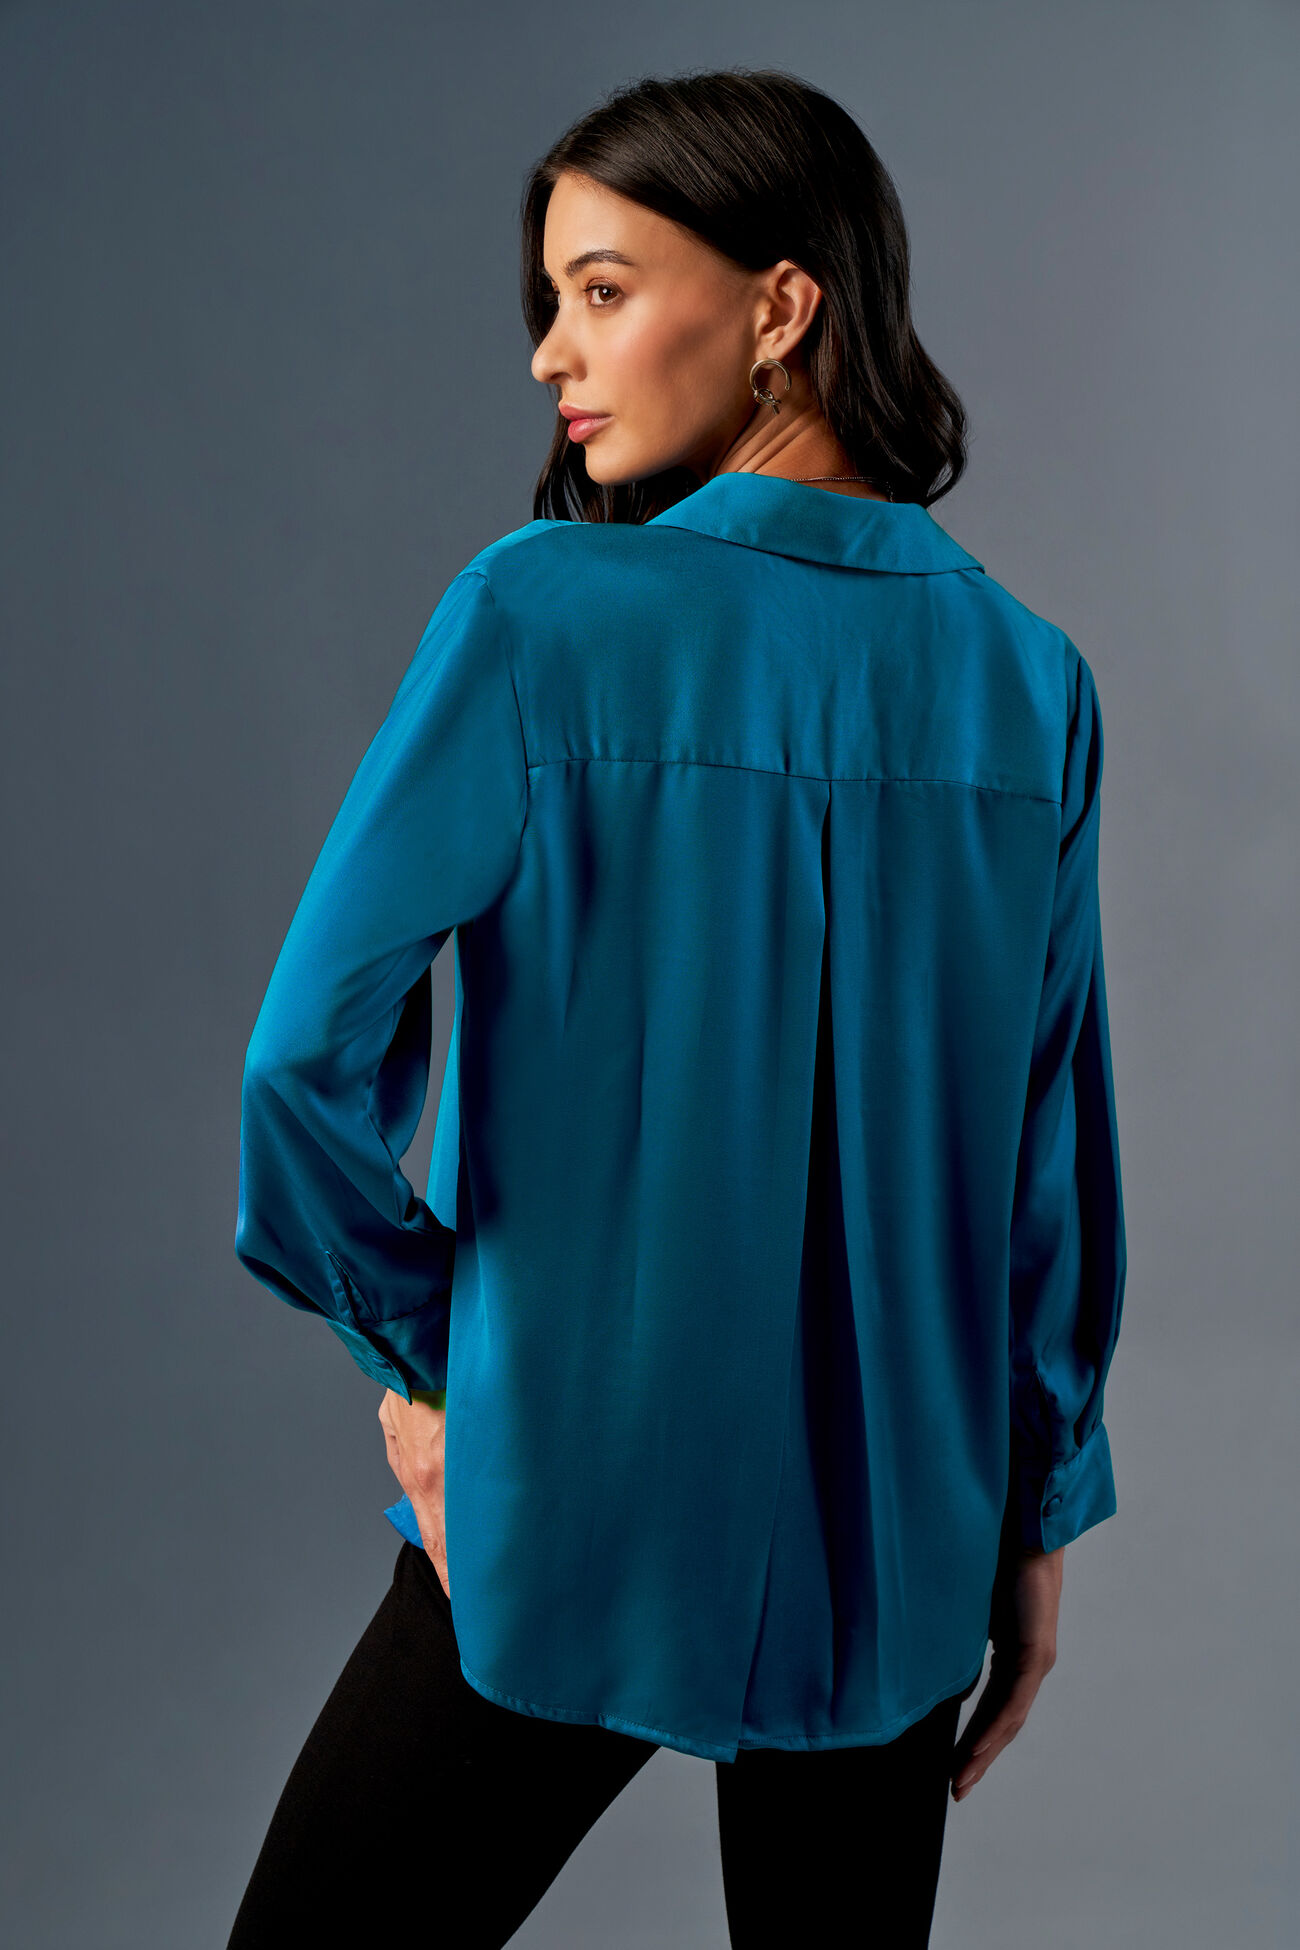 Teal Orchid Shirt, Teal, image 8